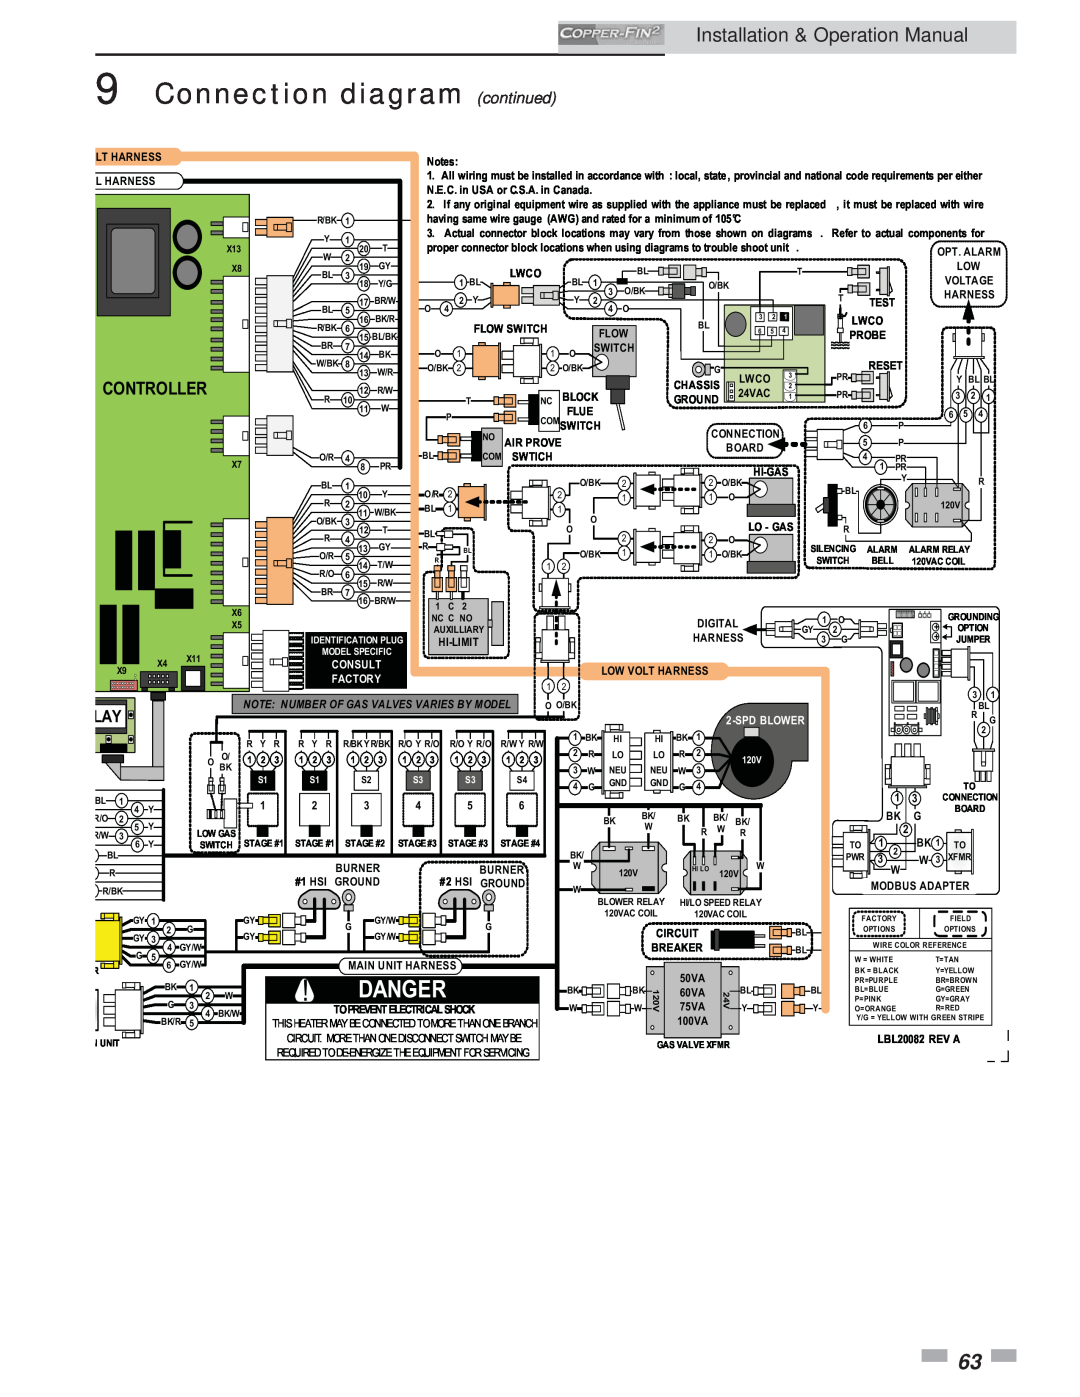 Lochinvar 2072, 502 operation manual Connection diagram continued, Danger, Installation & Operation Manual, Controller 